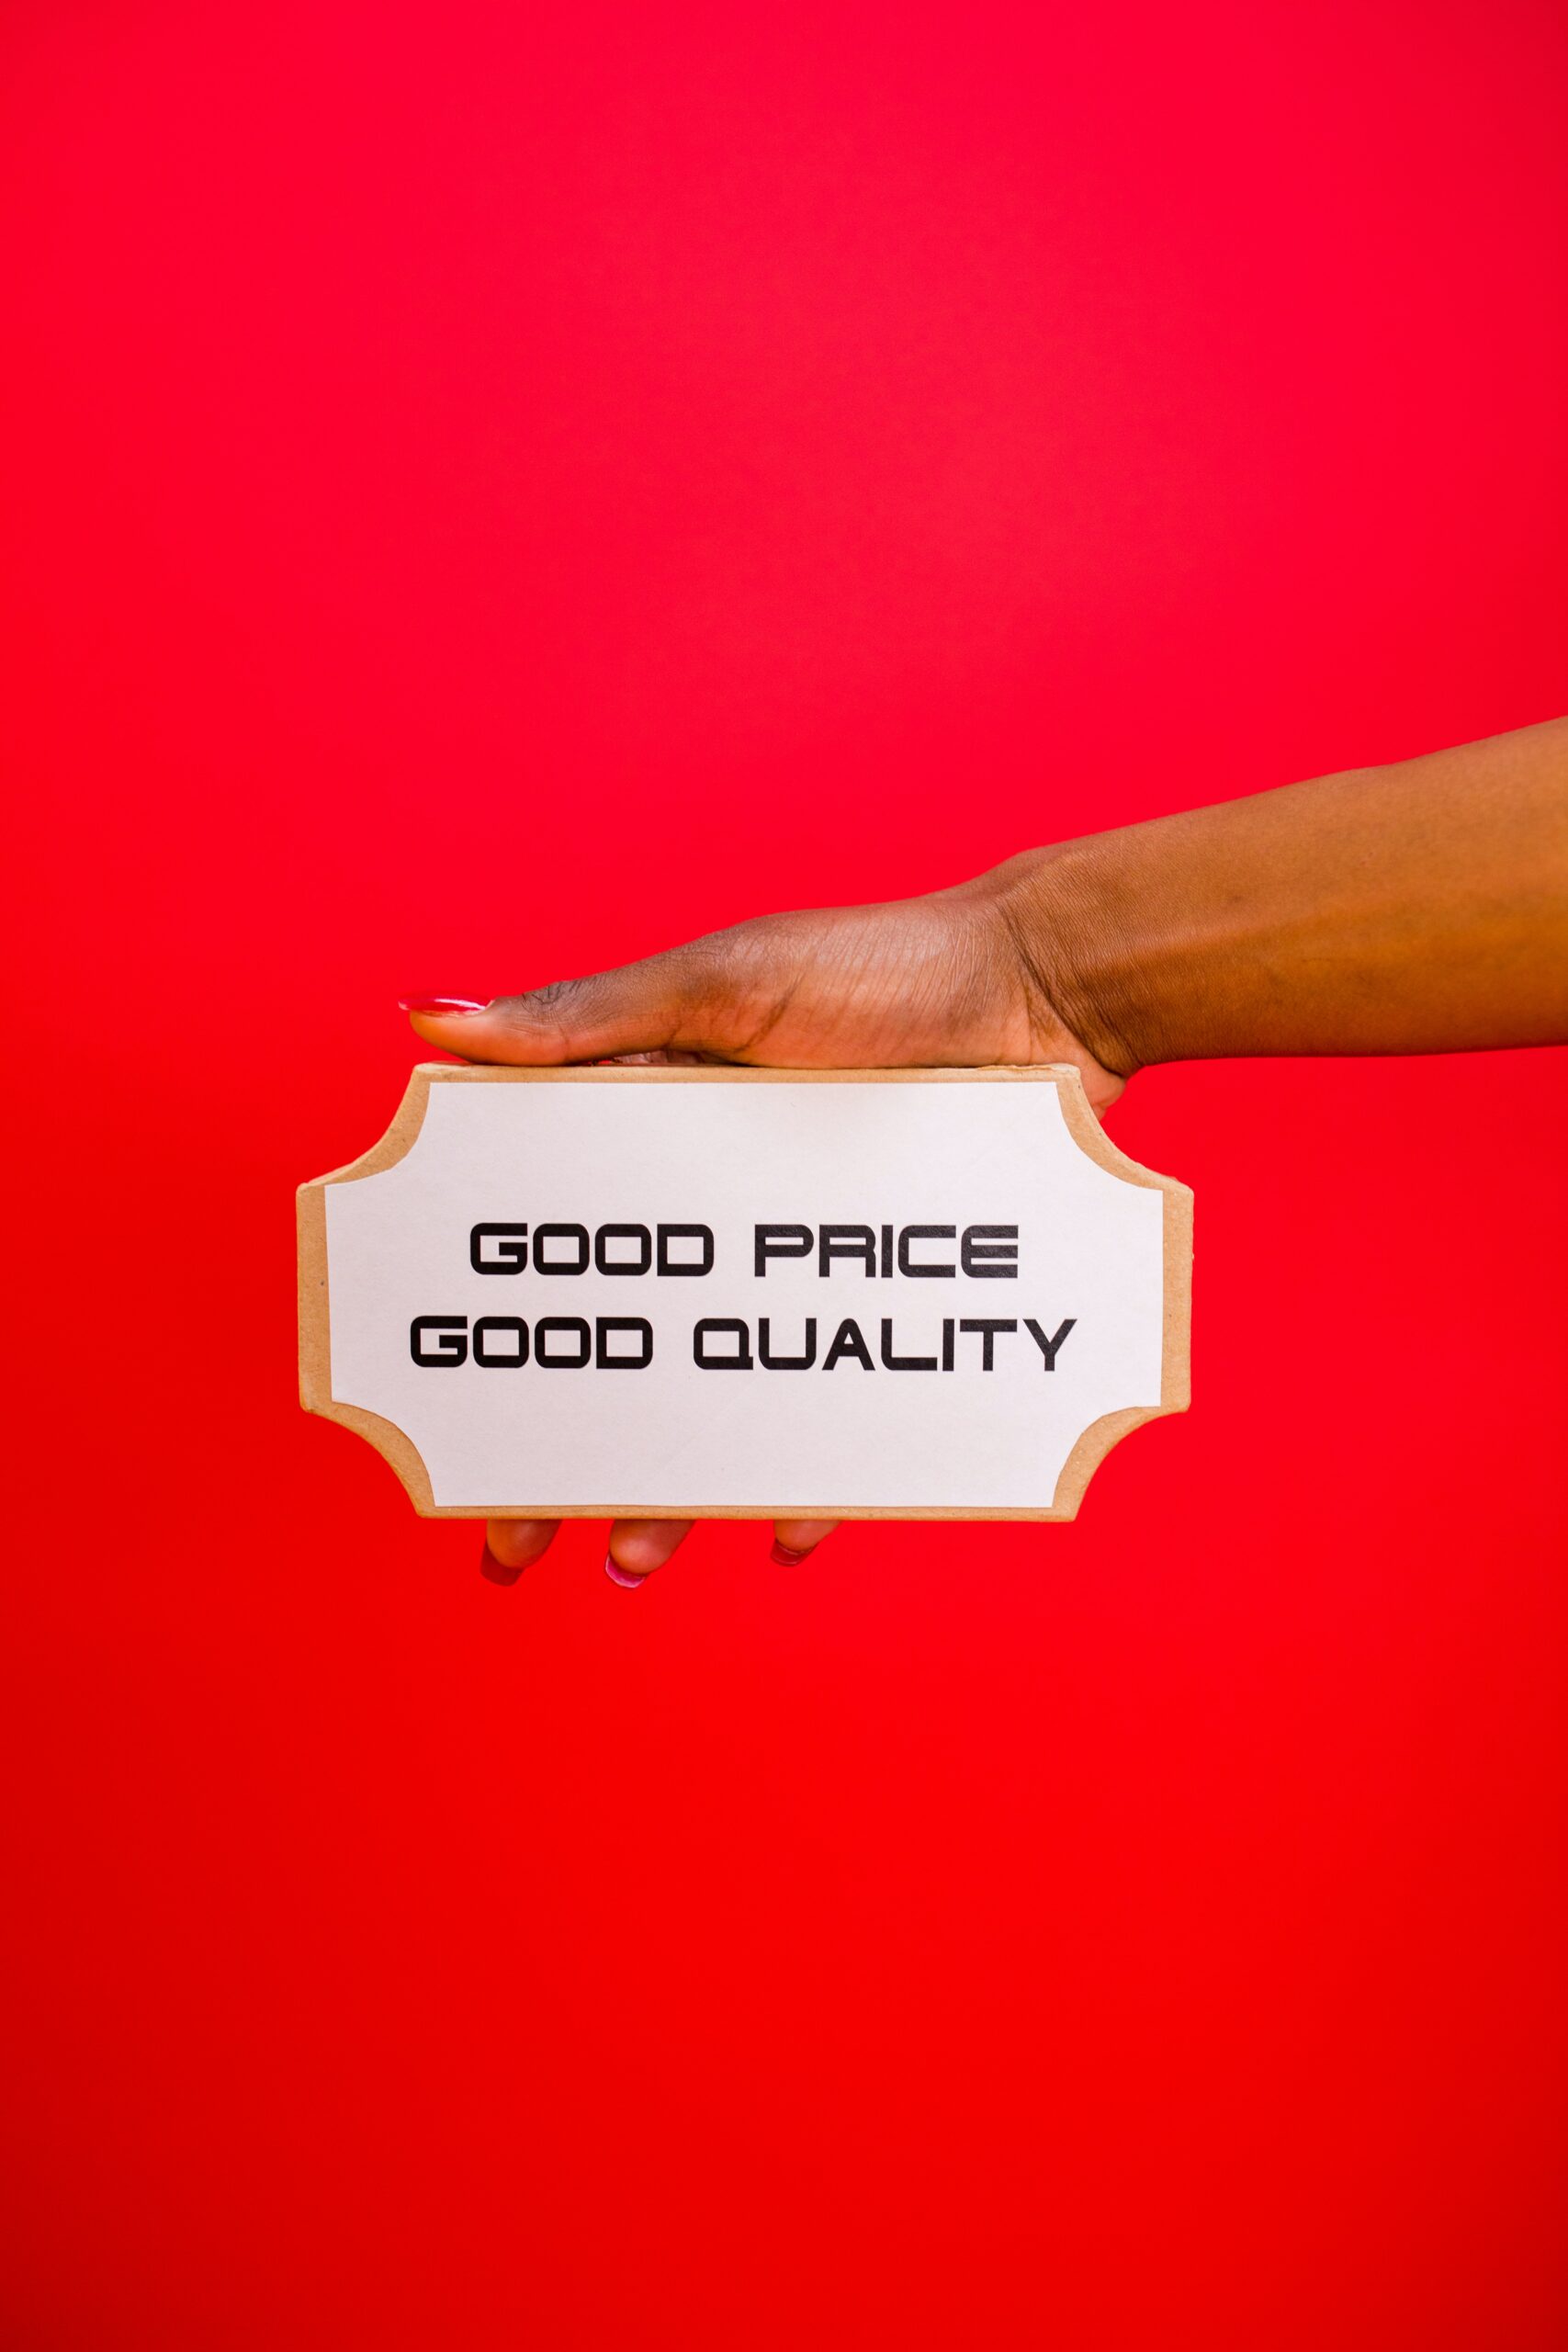 Tiered pricing using the decoy effect in marketing